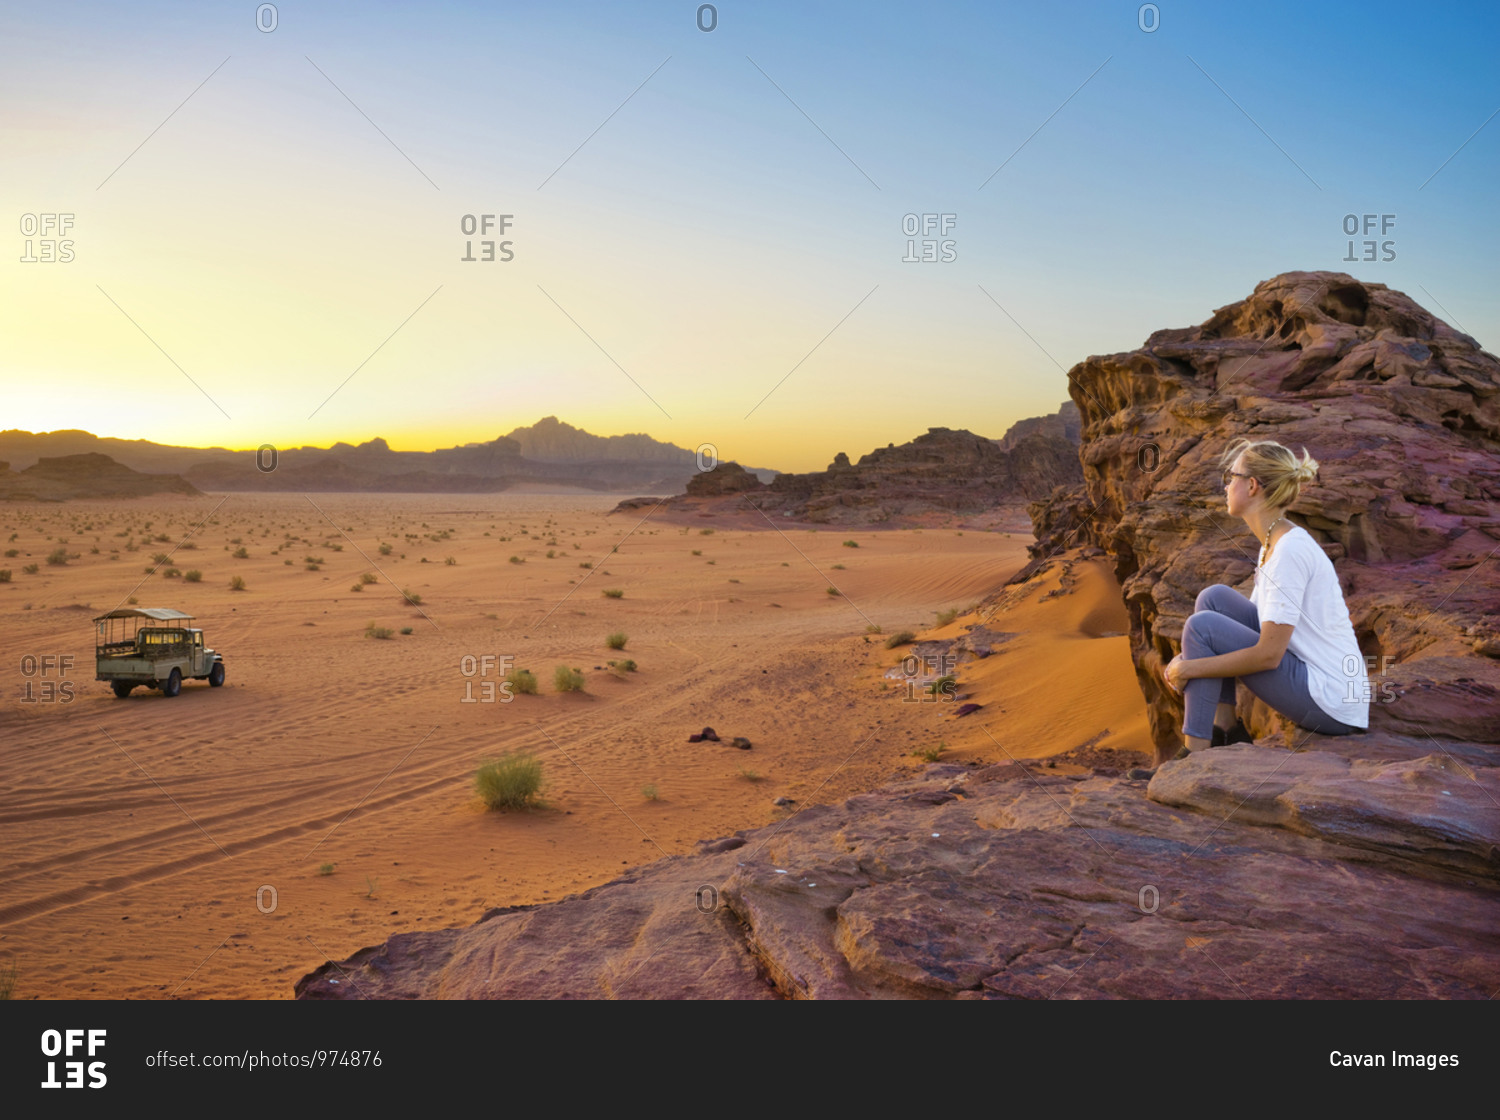 A woman sits on a rocky mountain top watching the sun set in the Wadi Rum desert, a truck is in the distance